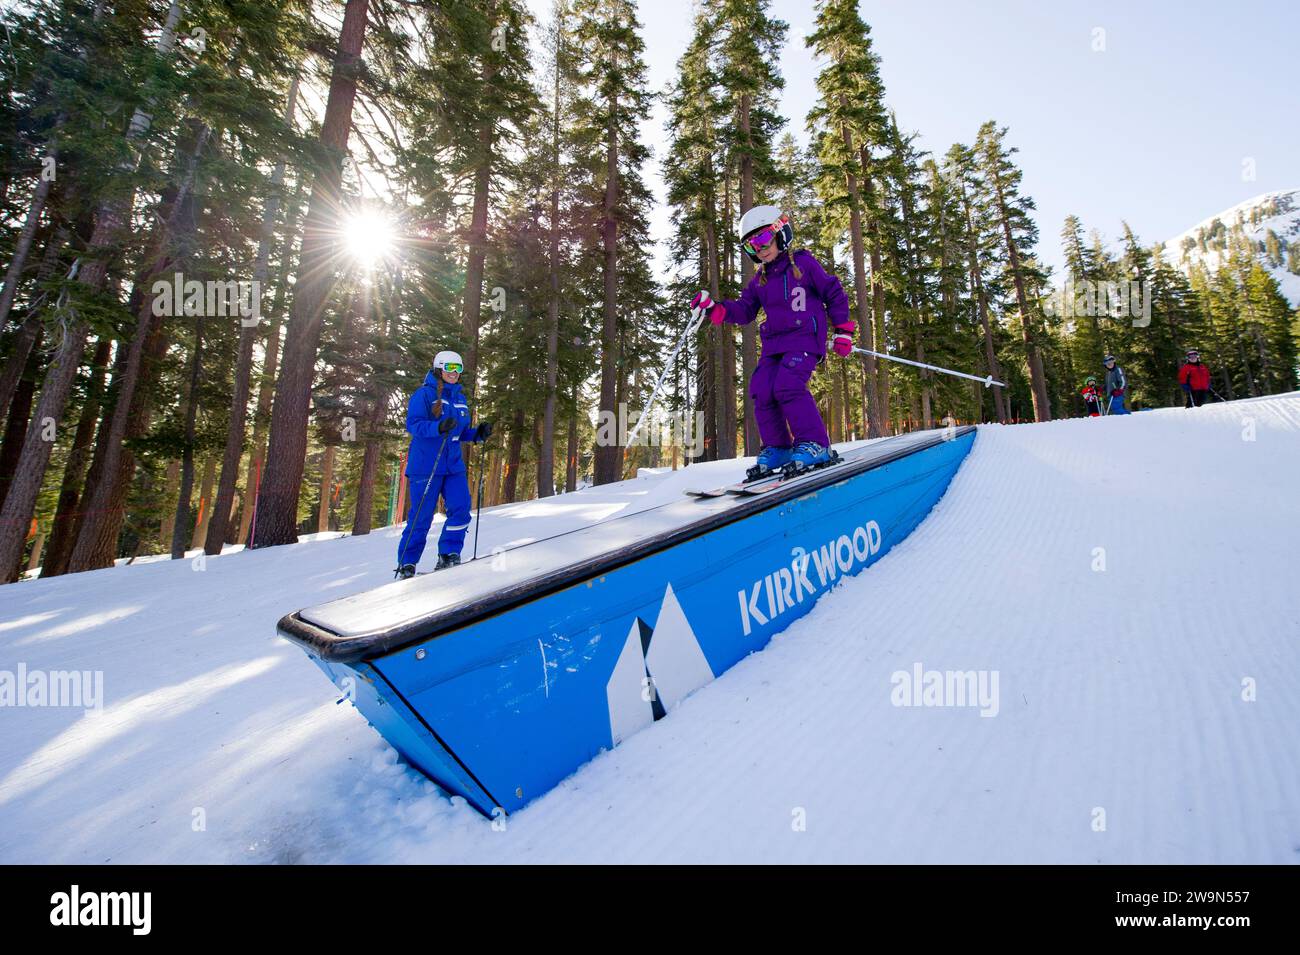 A young skier jibs a box in the terrain park while their ski instructor looks on during a lesson at Kirkwood Mountain Resort in Kirkwood, California. Stock Photo